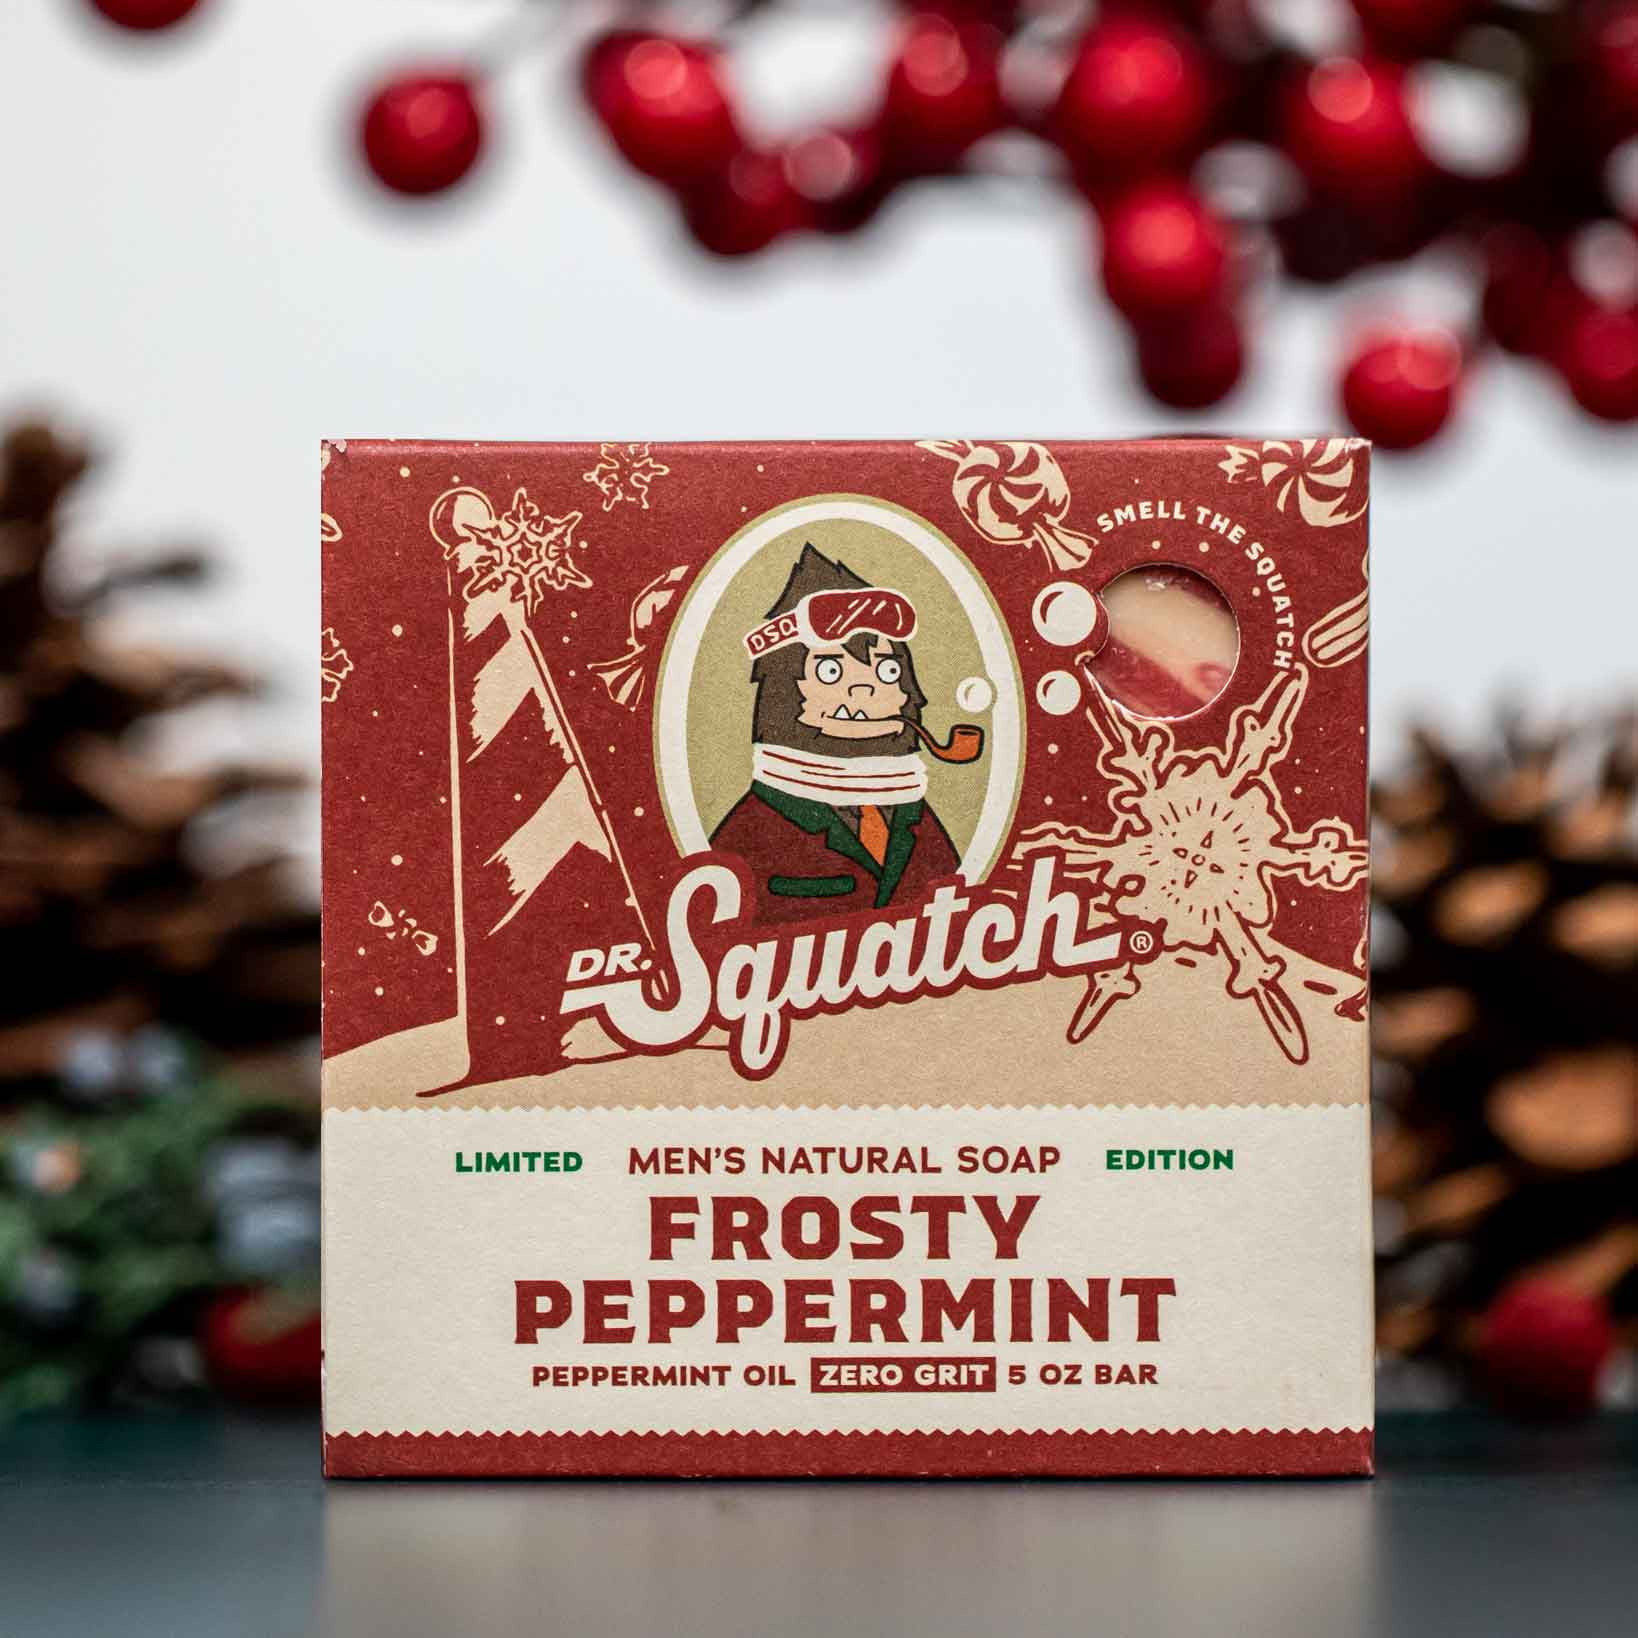 frosty peppermint dr squatch review｜TikTok Search